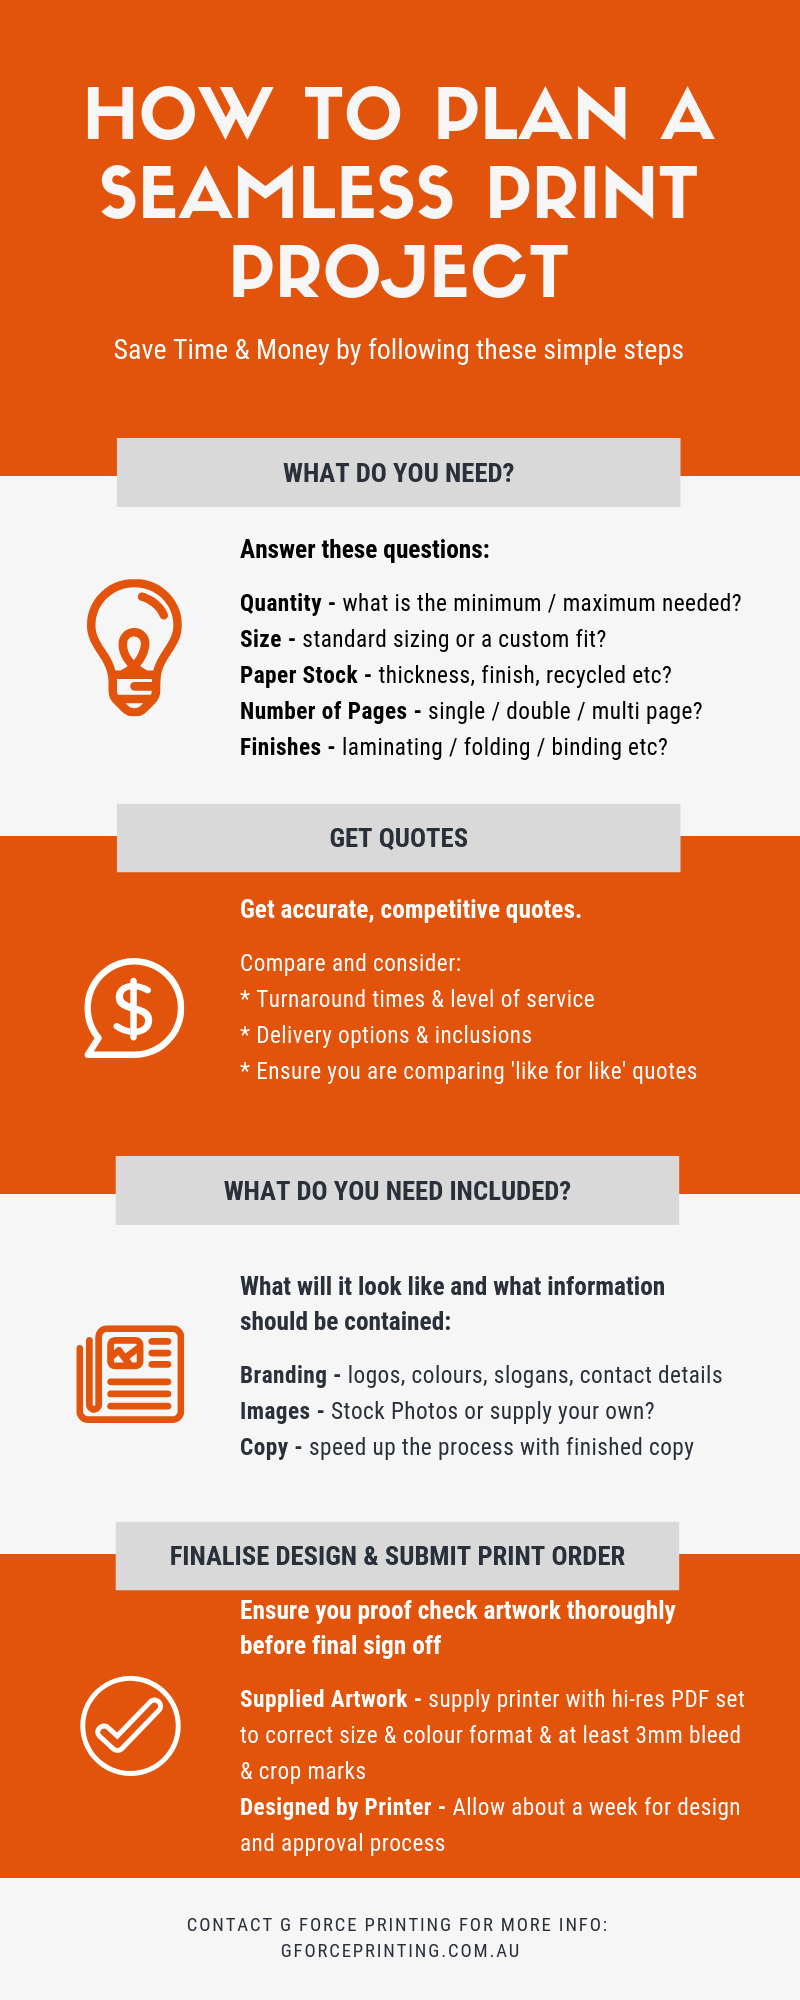 How to Plan a Seamless Print Project Infographic